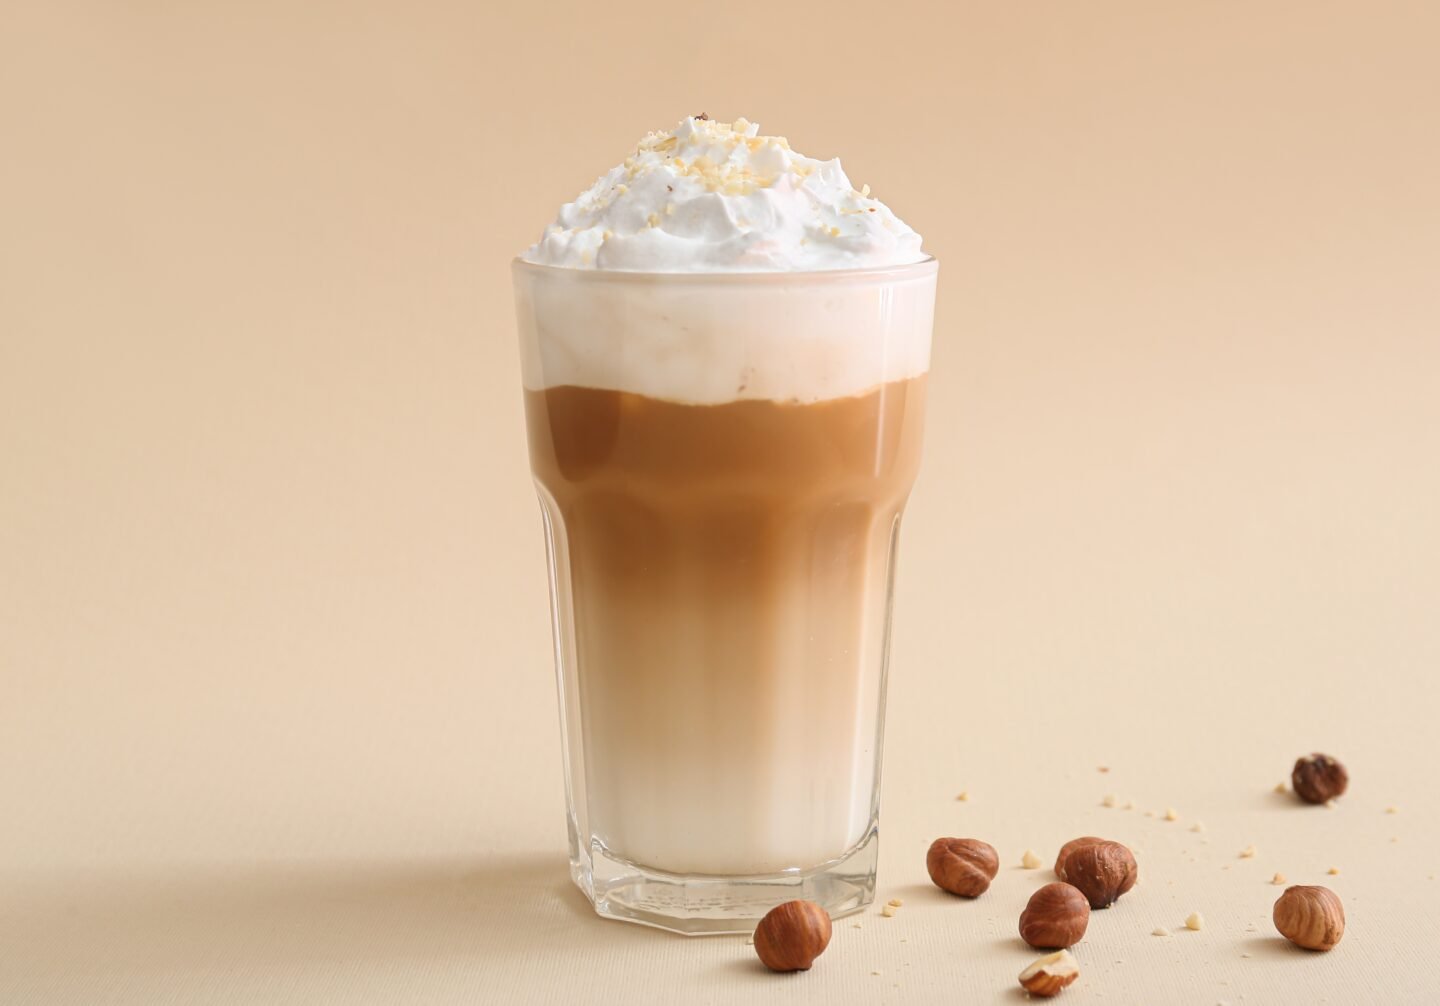 a-glass-of-latte-with-cream-toppings-on-a-beige-background